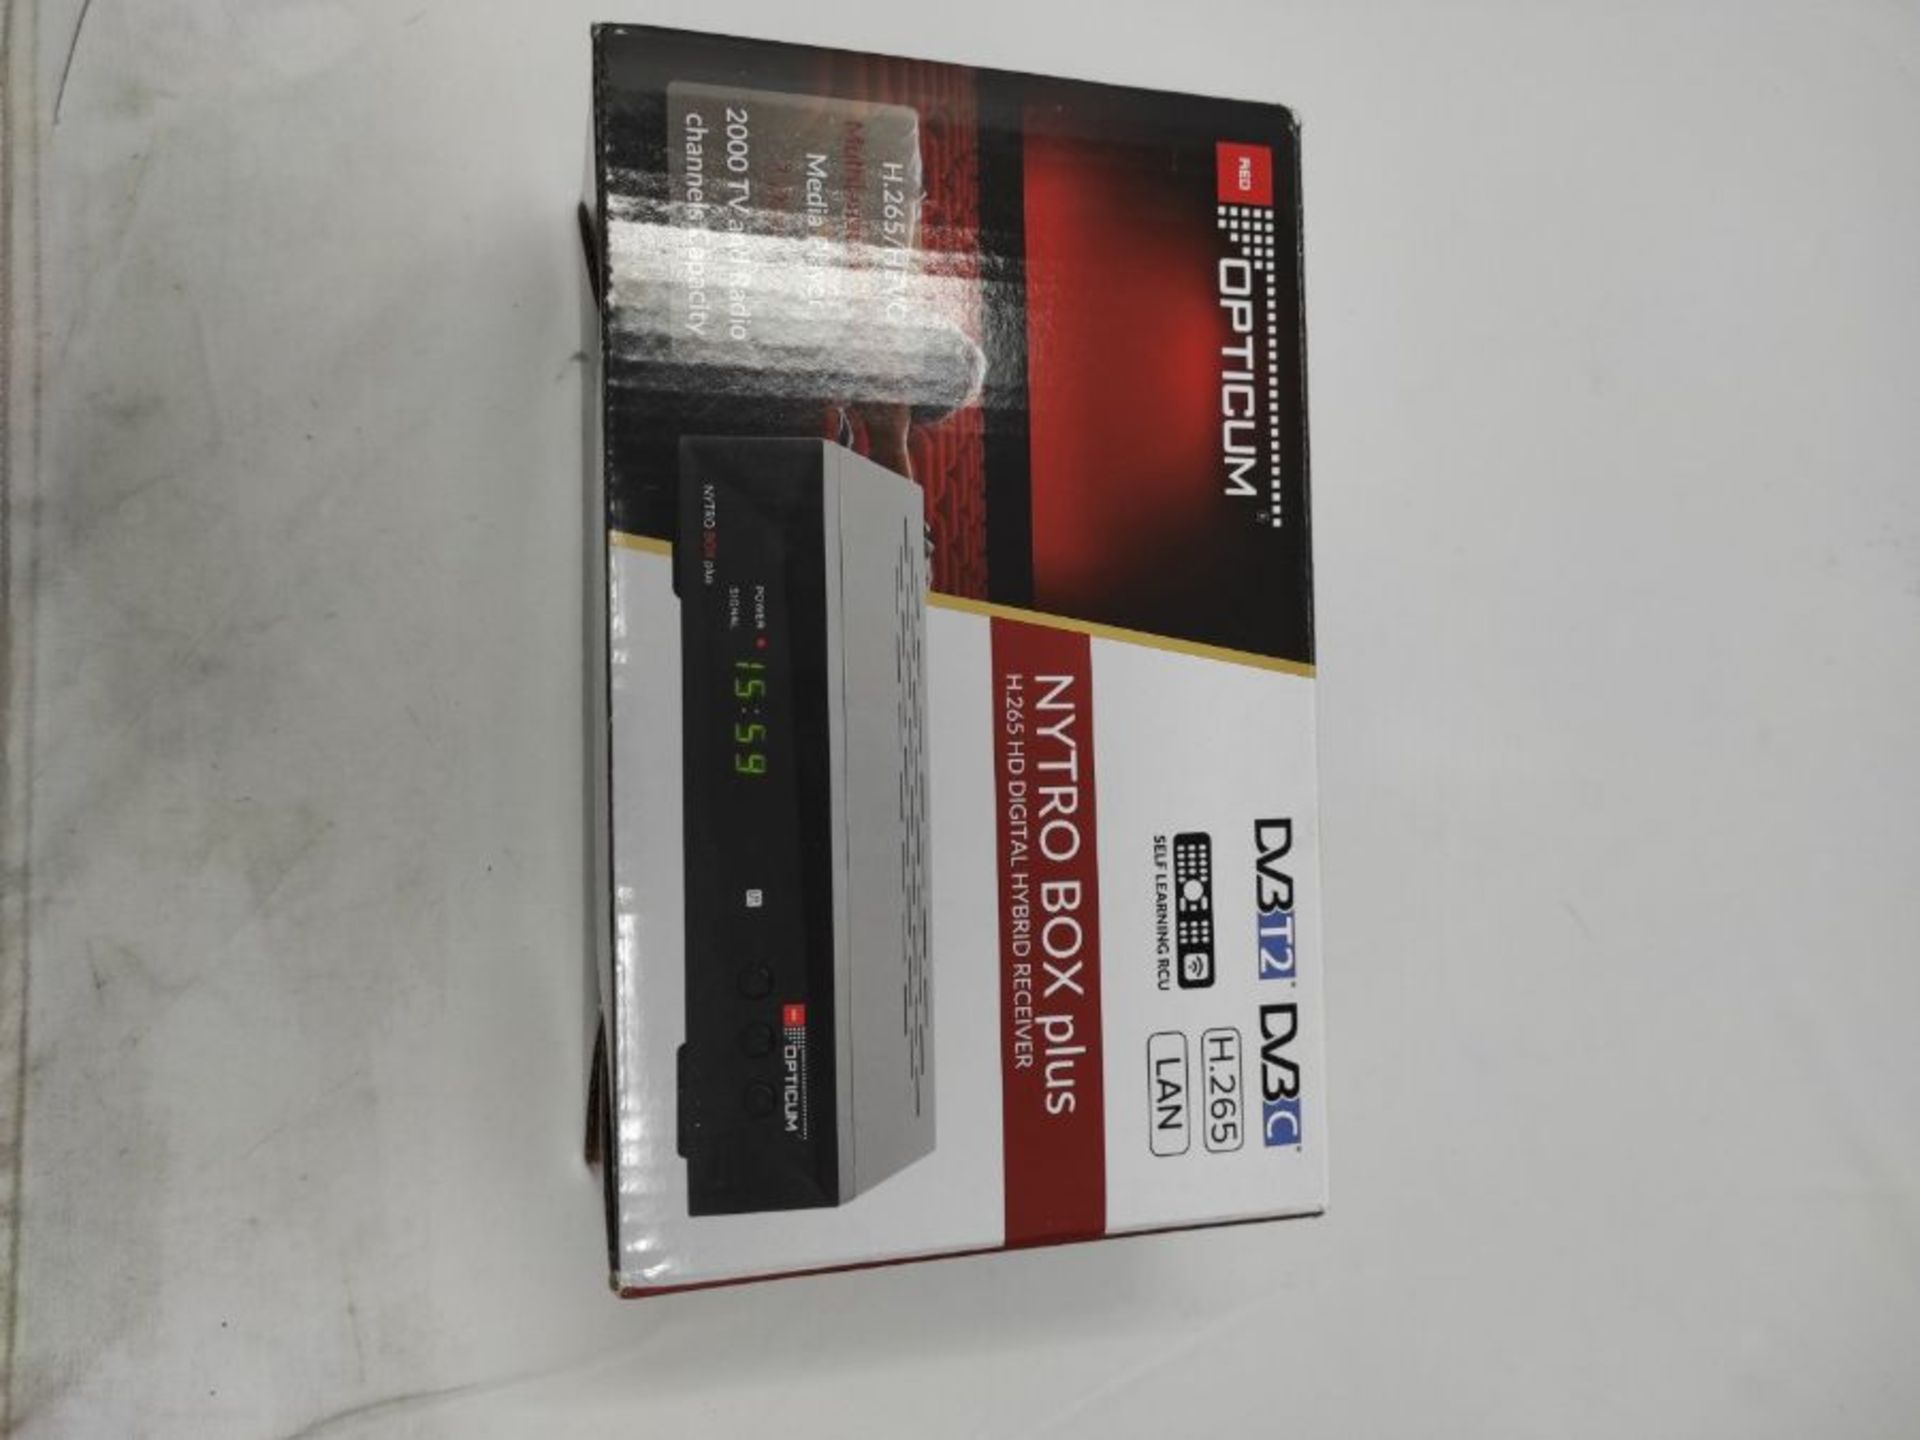 Red Opticum Nytro Box Plus Full HD DVB-T2 and DVB-C Hybrid Receiver with USB Recording - Image 2 of 3